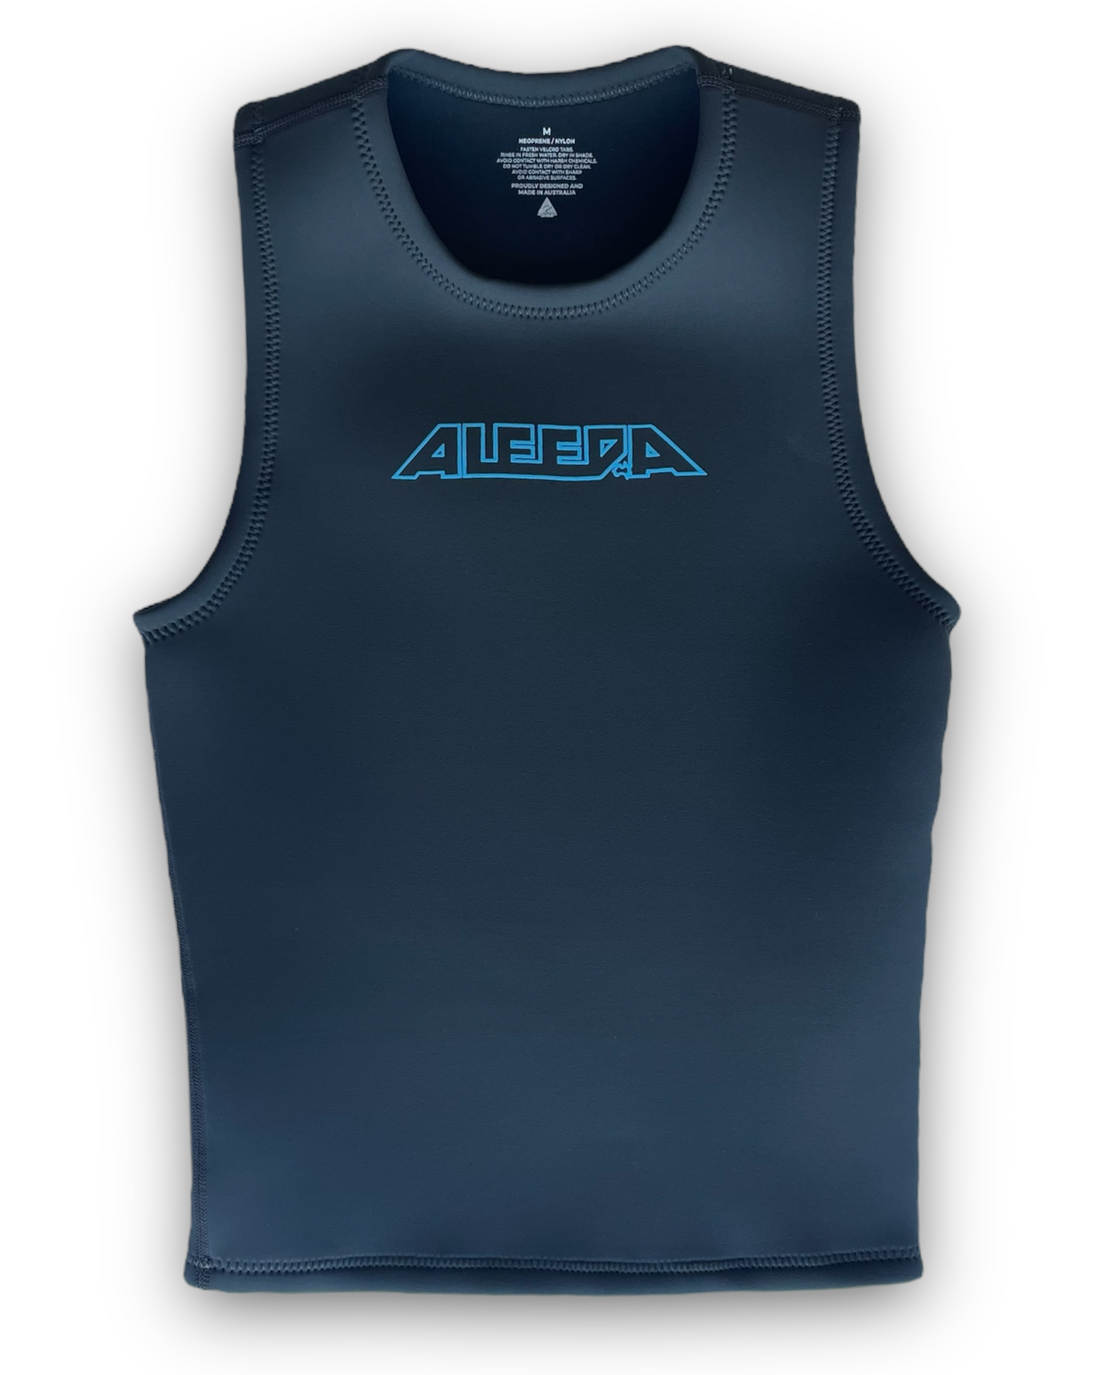 Wetsuit Singlet, Tank, 2mm, Mens, Adult , Charcoal - front flat lay